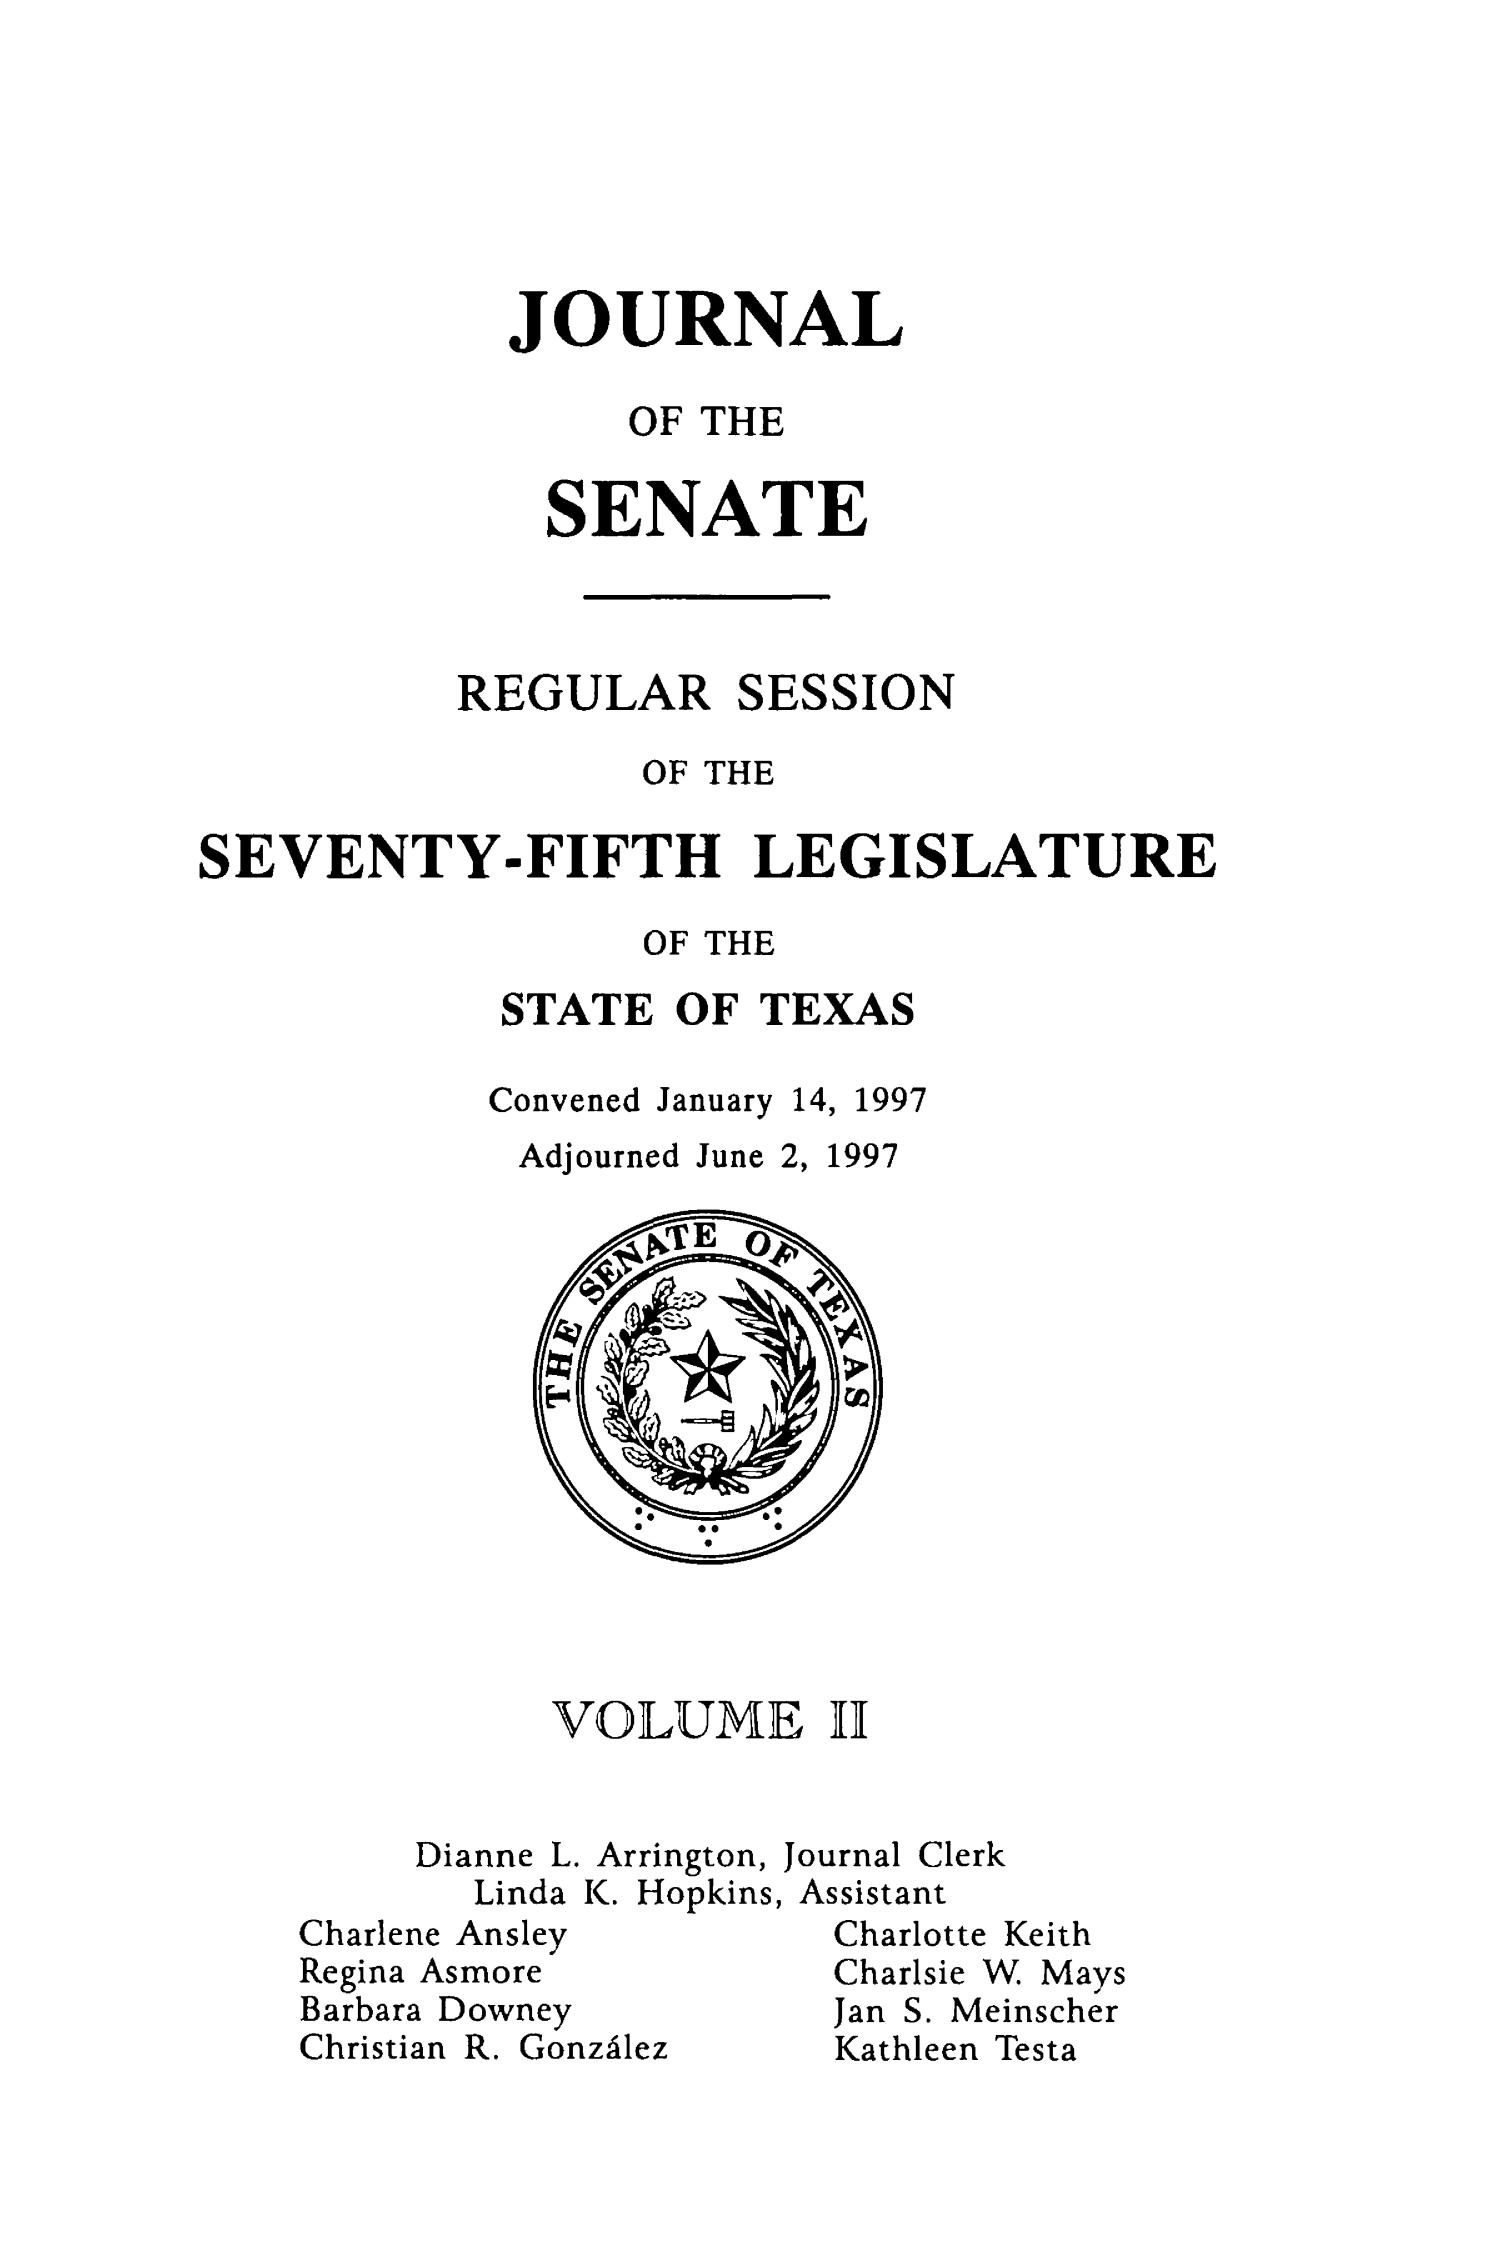 Journal of the Senate, Regular Session of the Seventy-Fifth Legislature of the State of Texas, Volume 2
                                                
                                                    Title Page
                                                